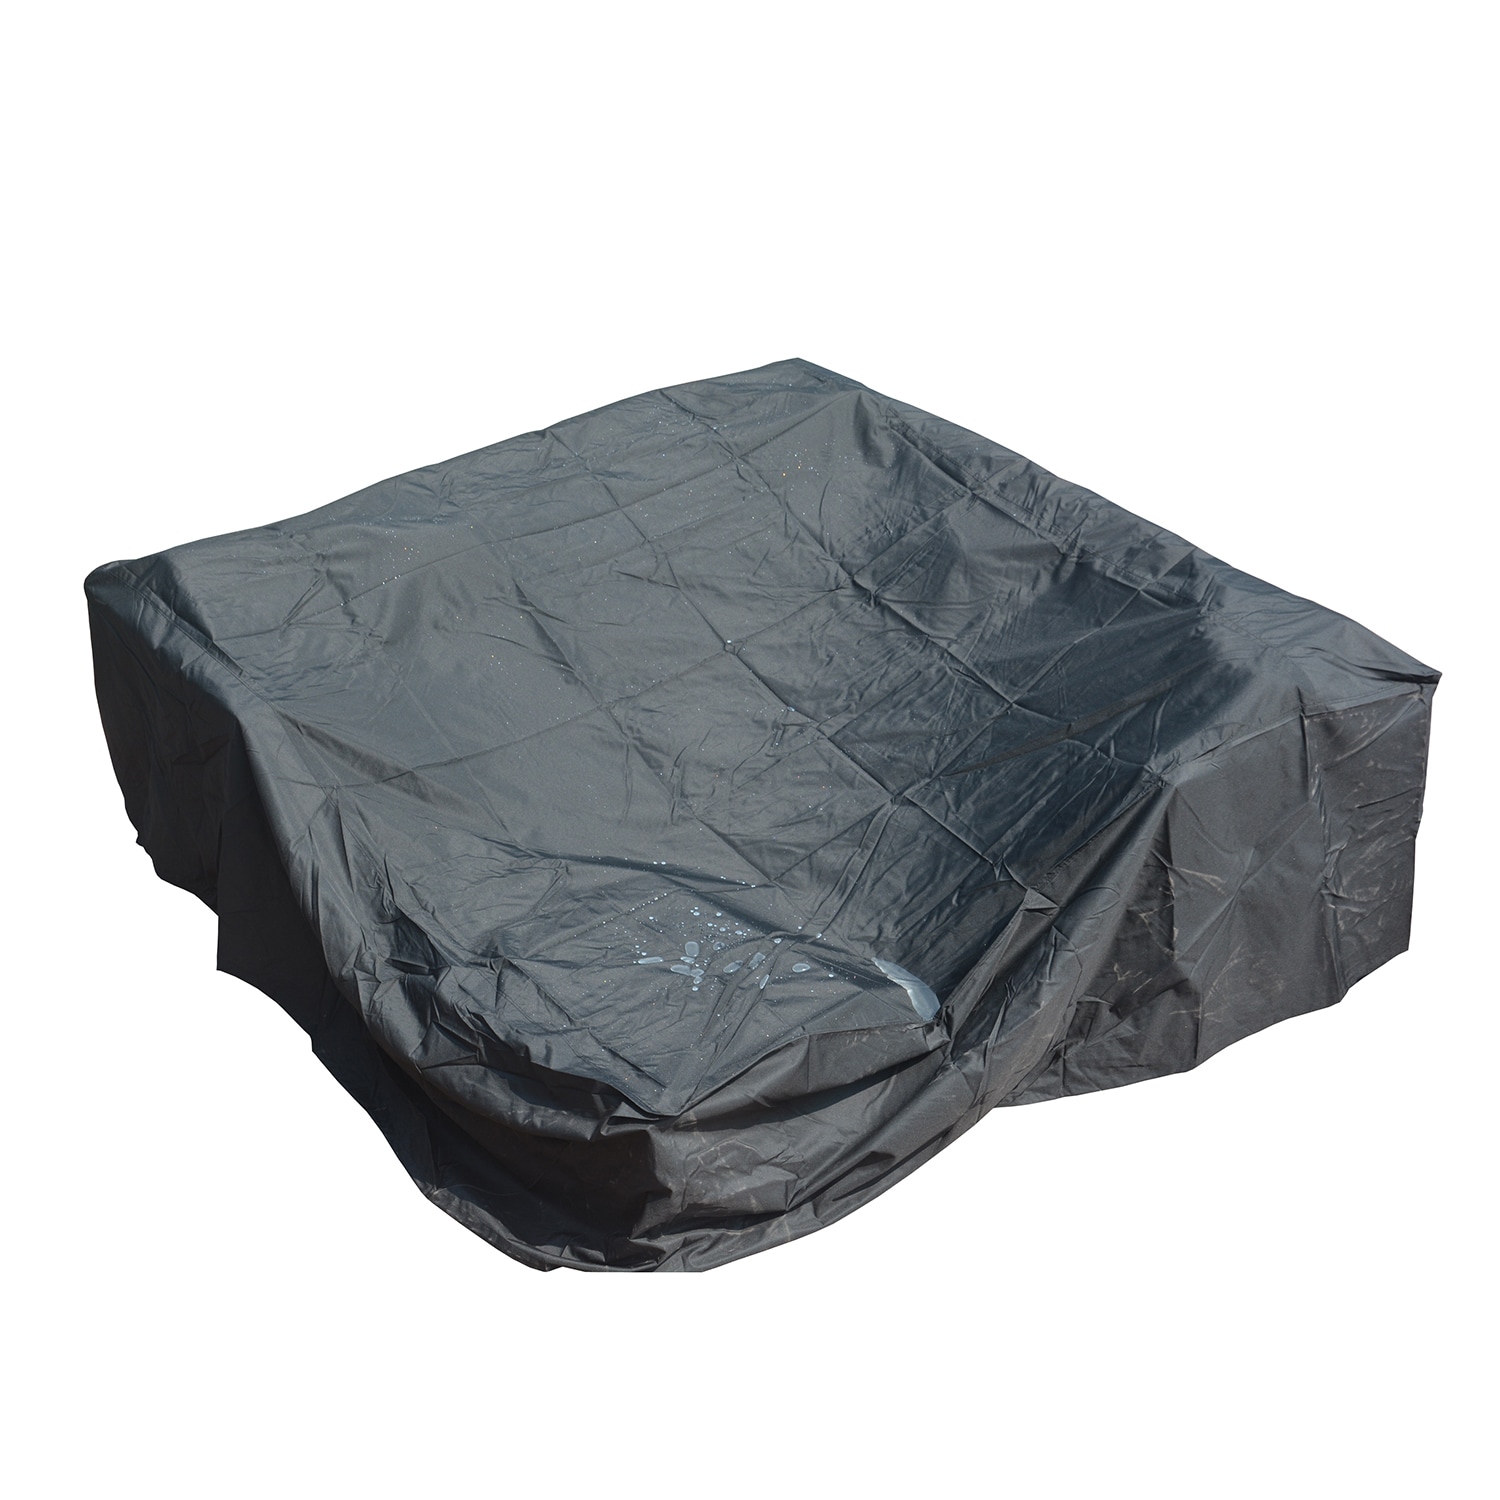 Rain cover of 1120 in black Polyester Conversation Set Patio Furniture Cover | - Moda Furnishings RC-1120